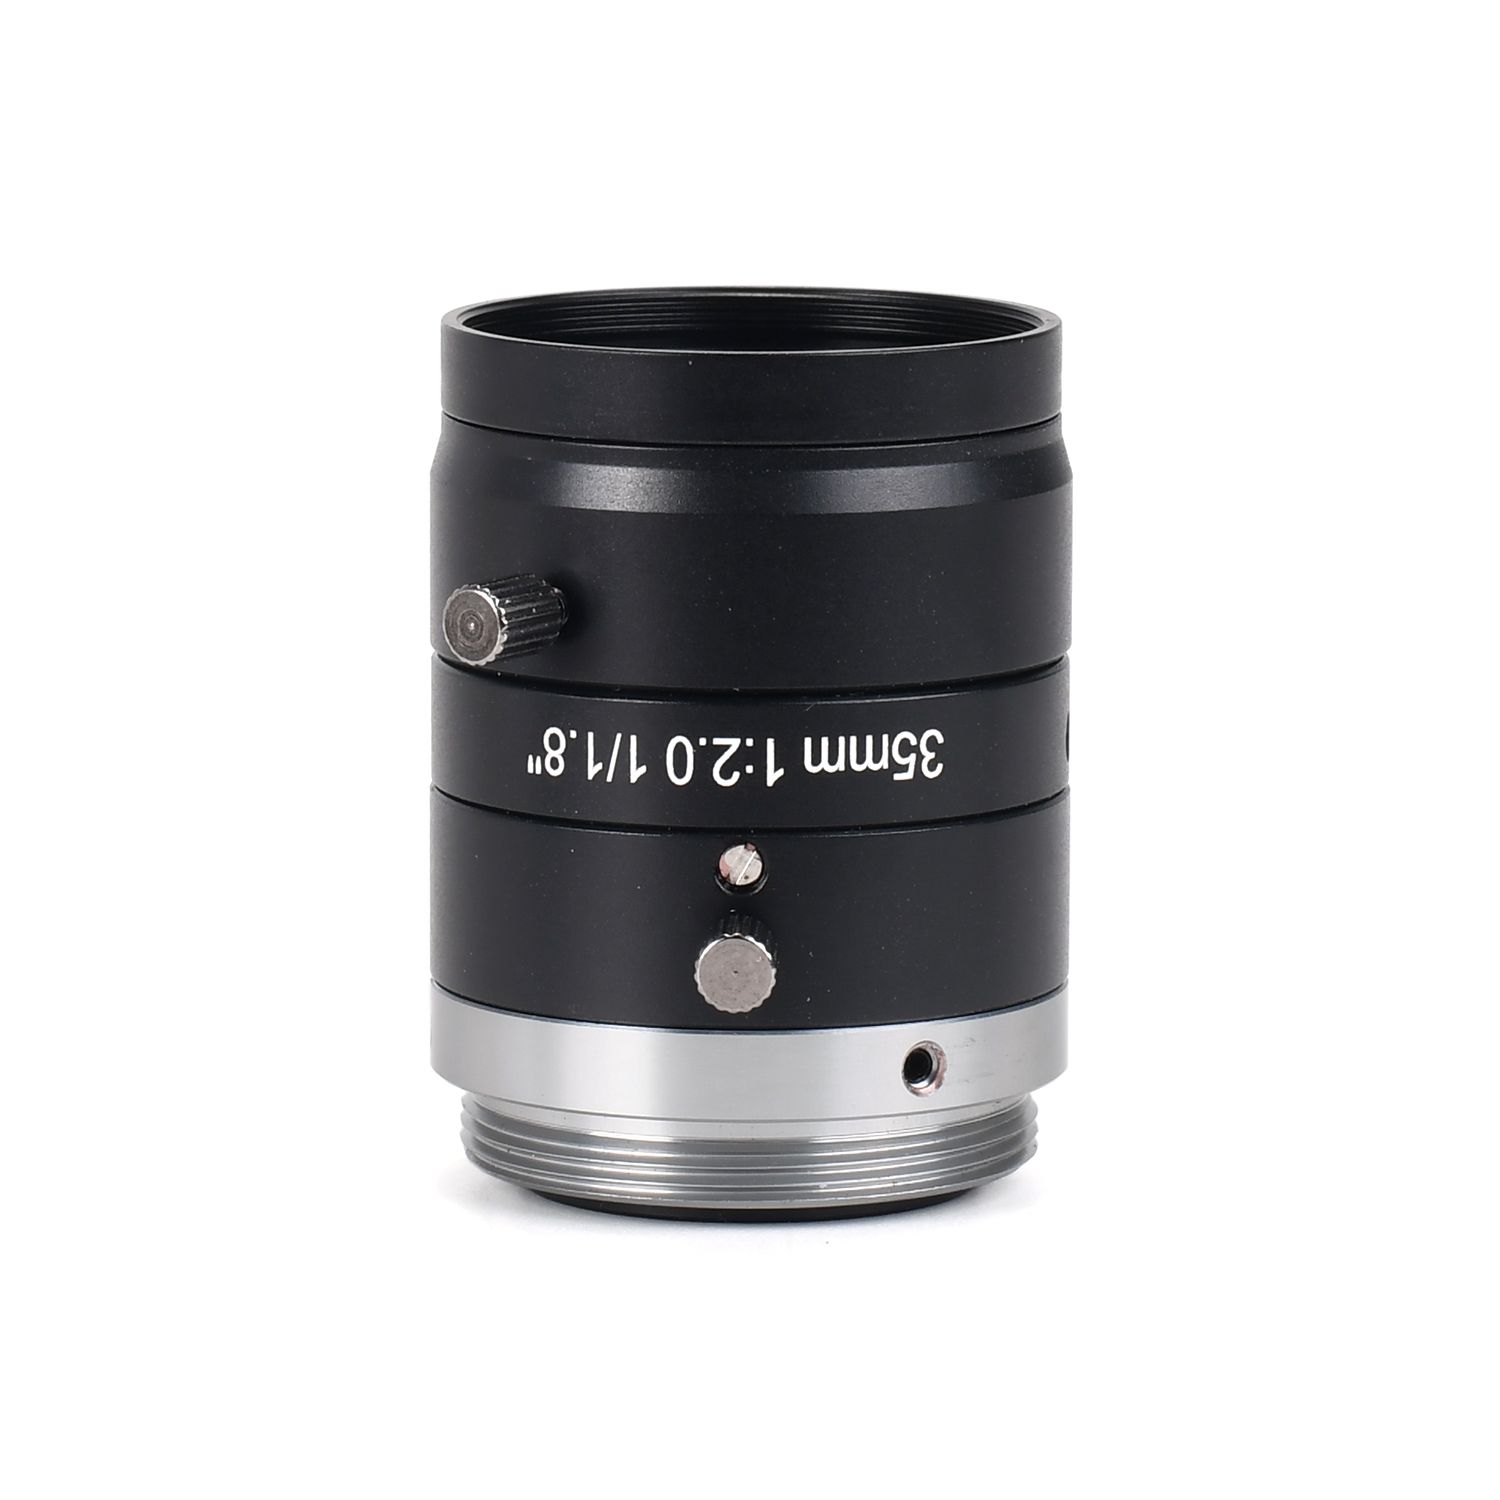 High Definition FA 35mm 1/1.8" Machine Vision Lens Without Distortion Professional C-Mouth Industrial Camera lens